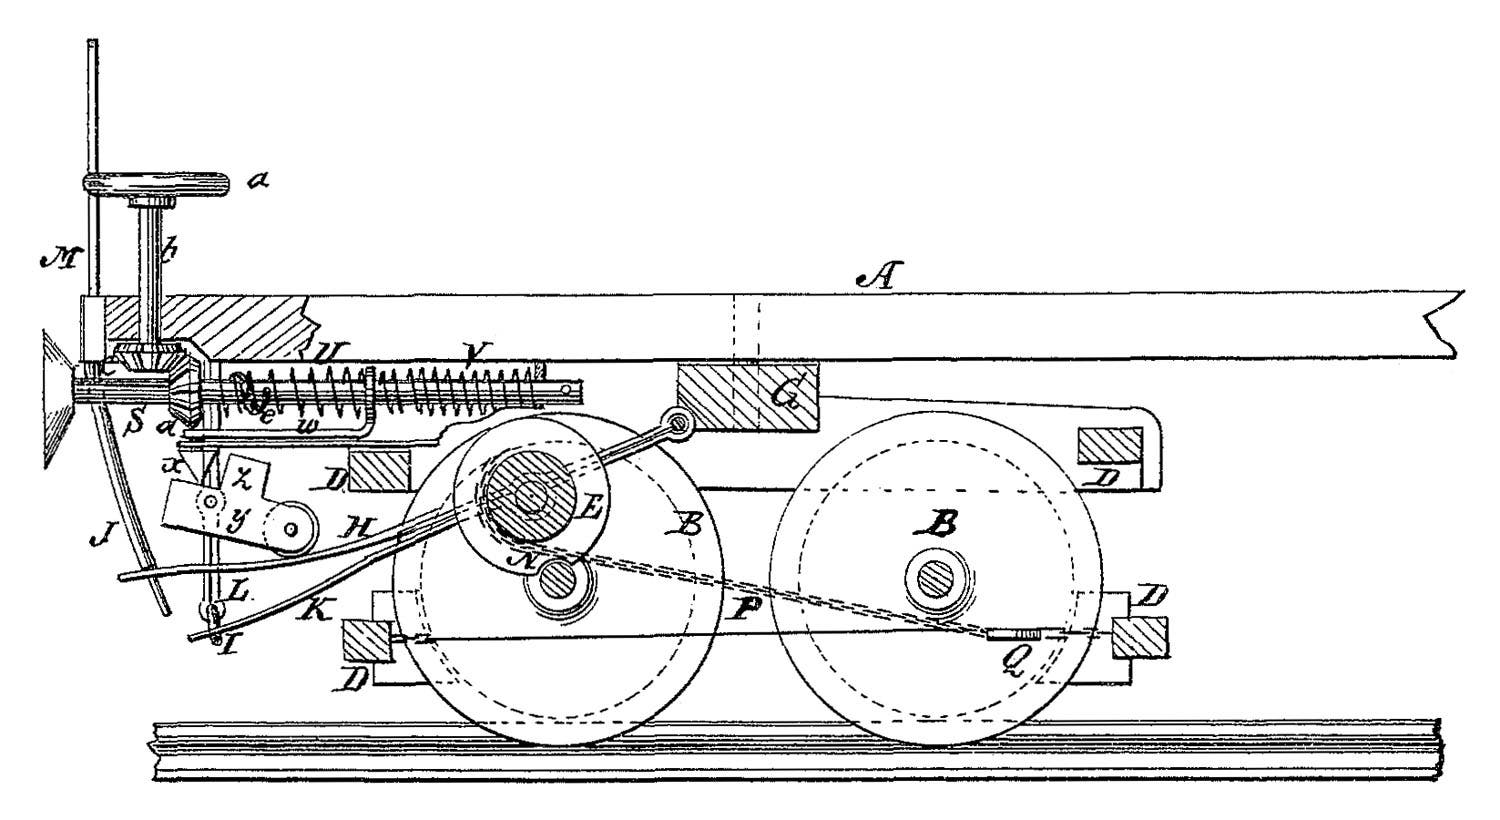 Diagram for an automatic brake patented by Luther Adams in 1873.